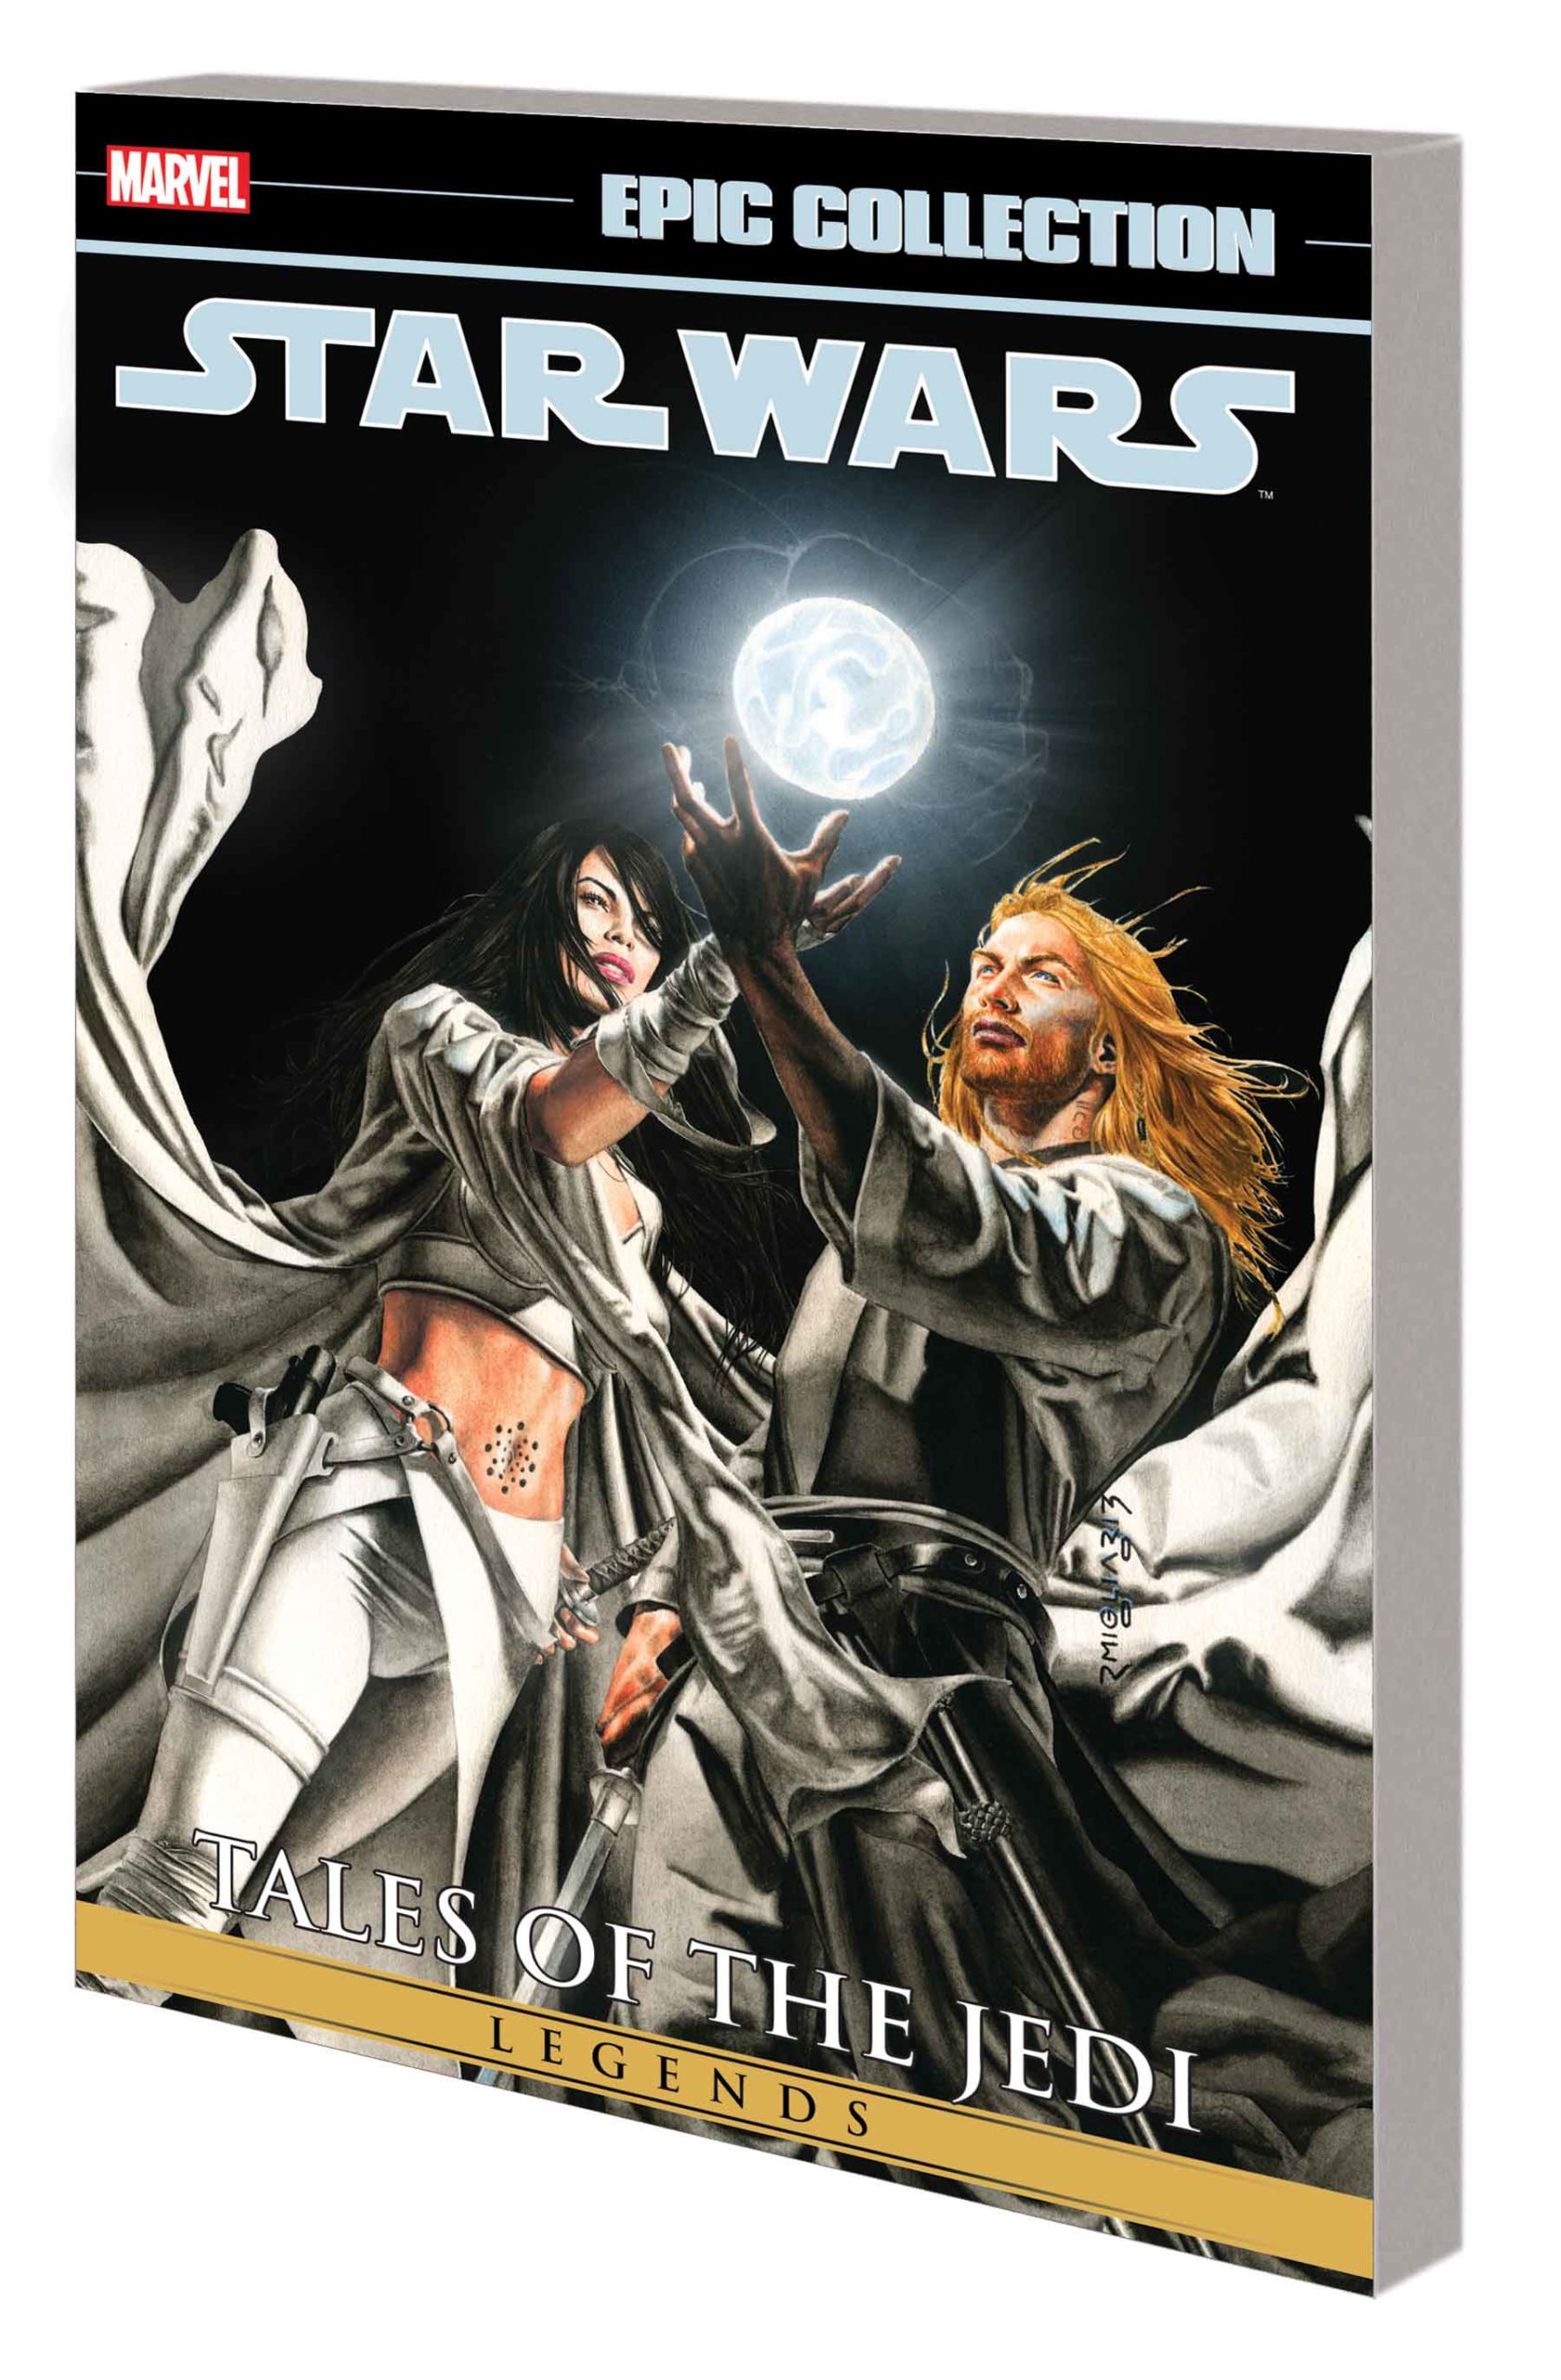 Star Wars Legends Epic Collection Tales of the Jedi Volume 1 (25.11.2020)